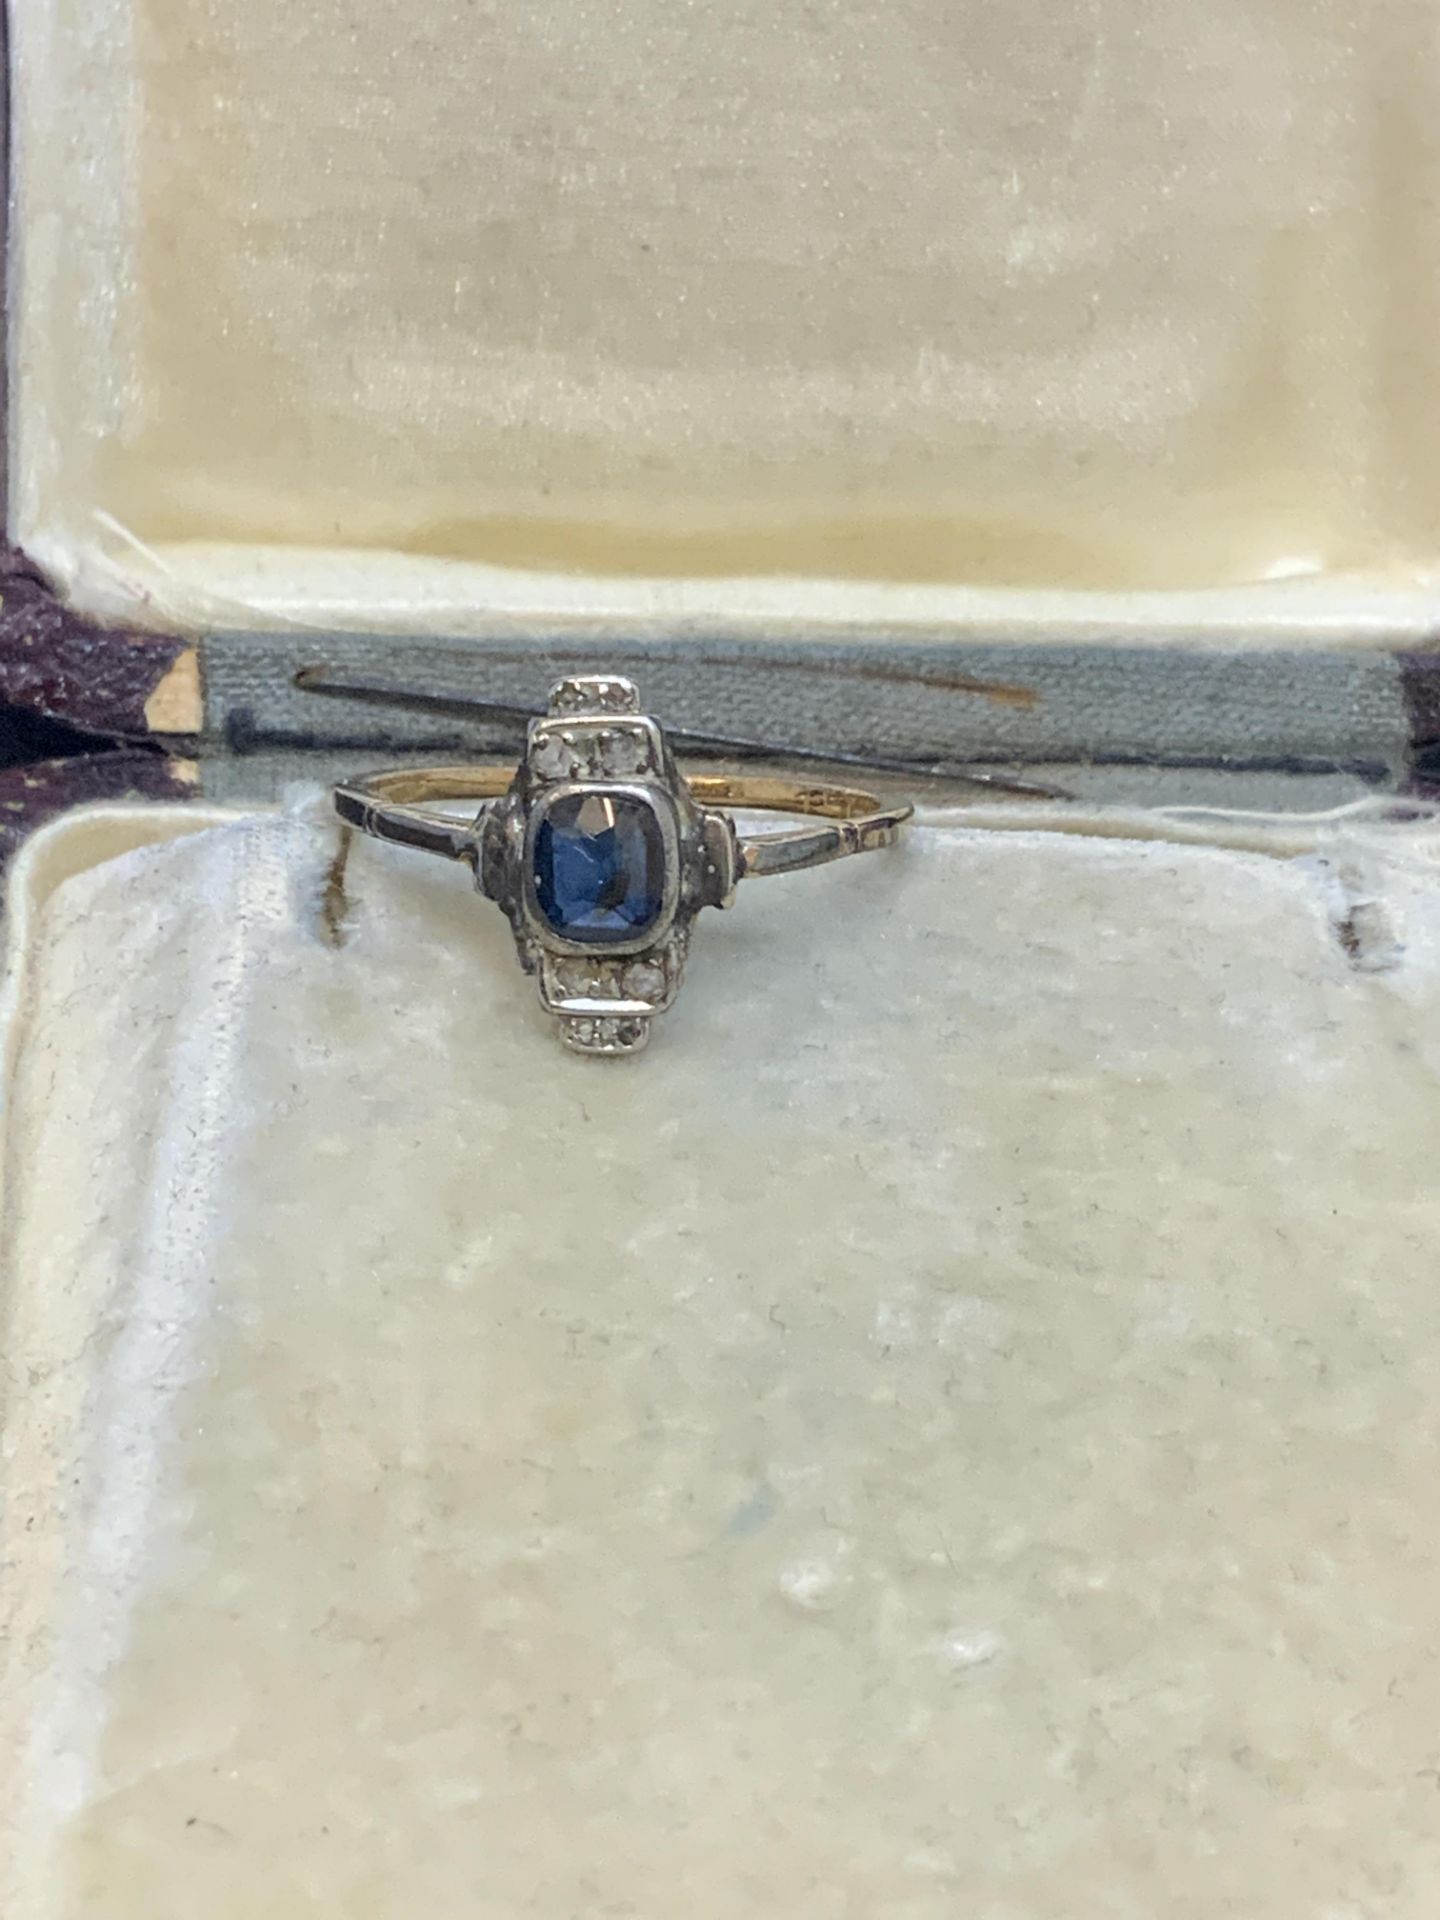 ANTIQUE SAPPHIRE & DIAMOND RING SET IN GOLD - Image 2 of 7